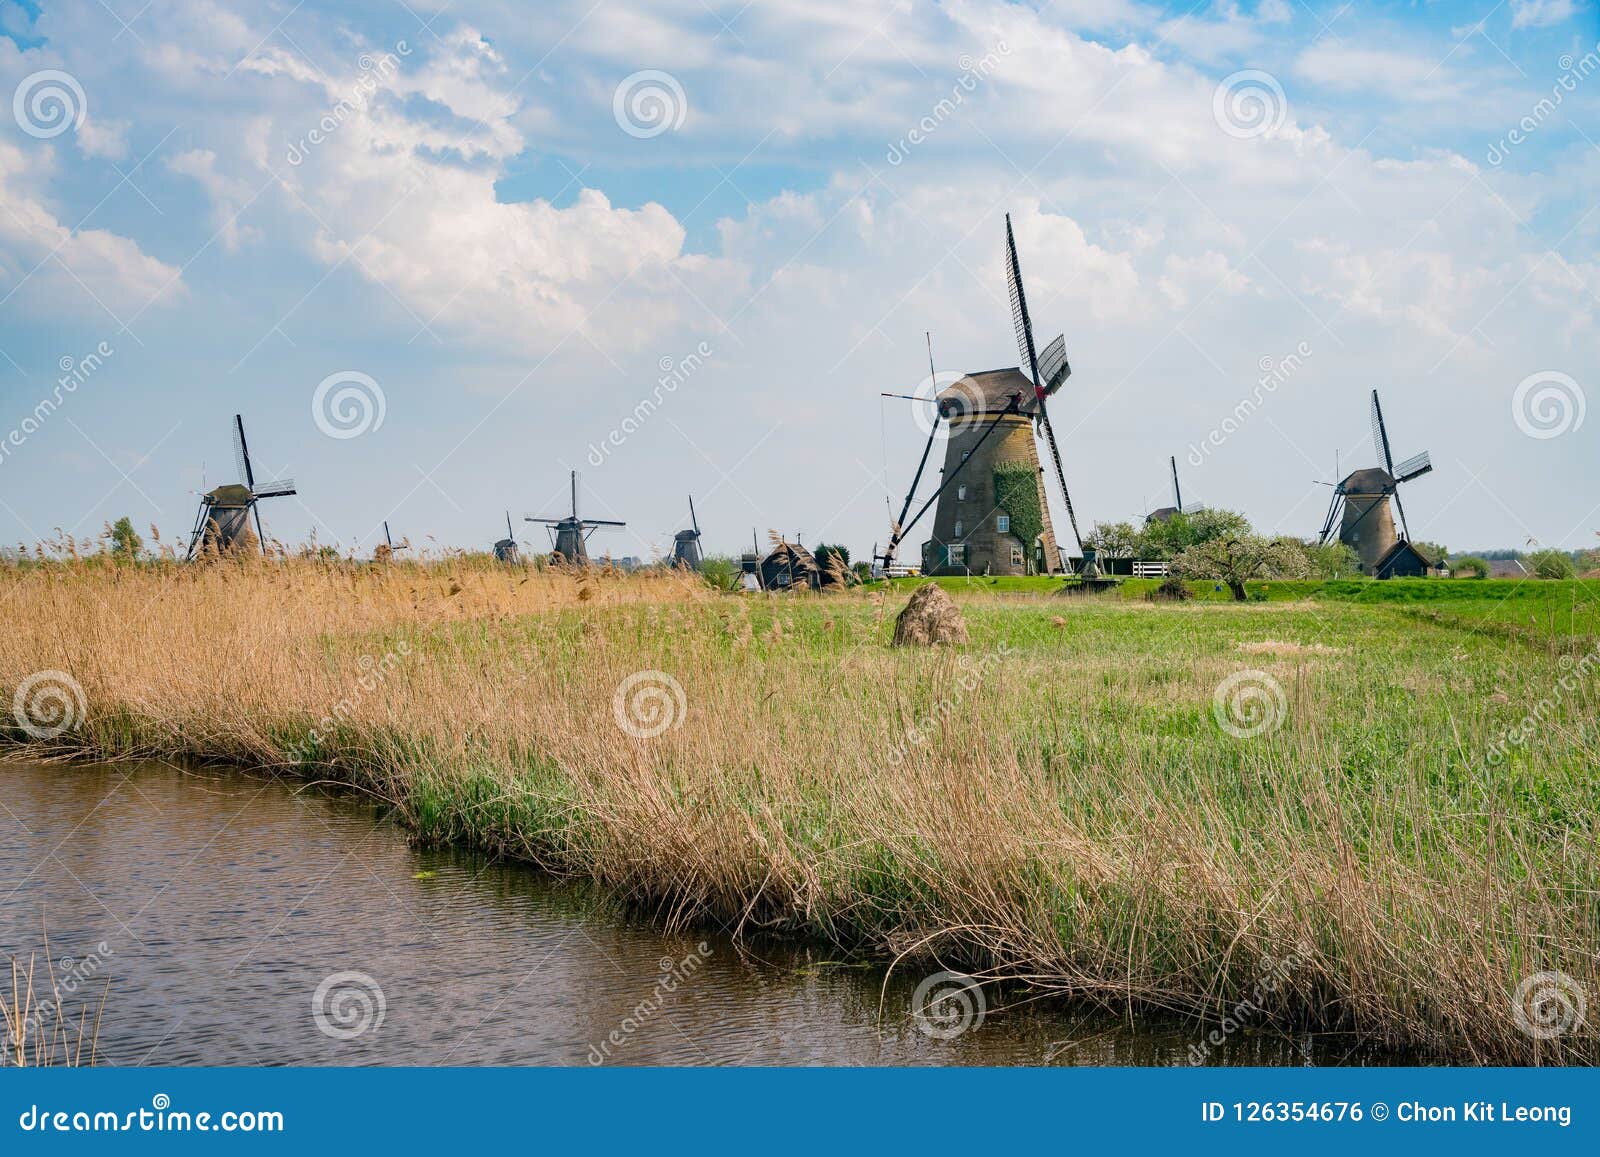 afternoon view of the famous kinderdijk winmill village